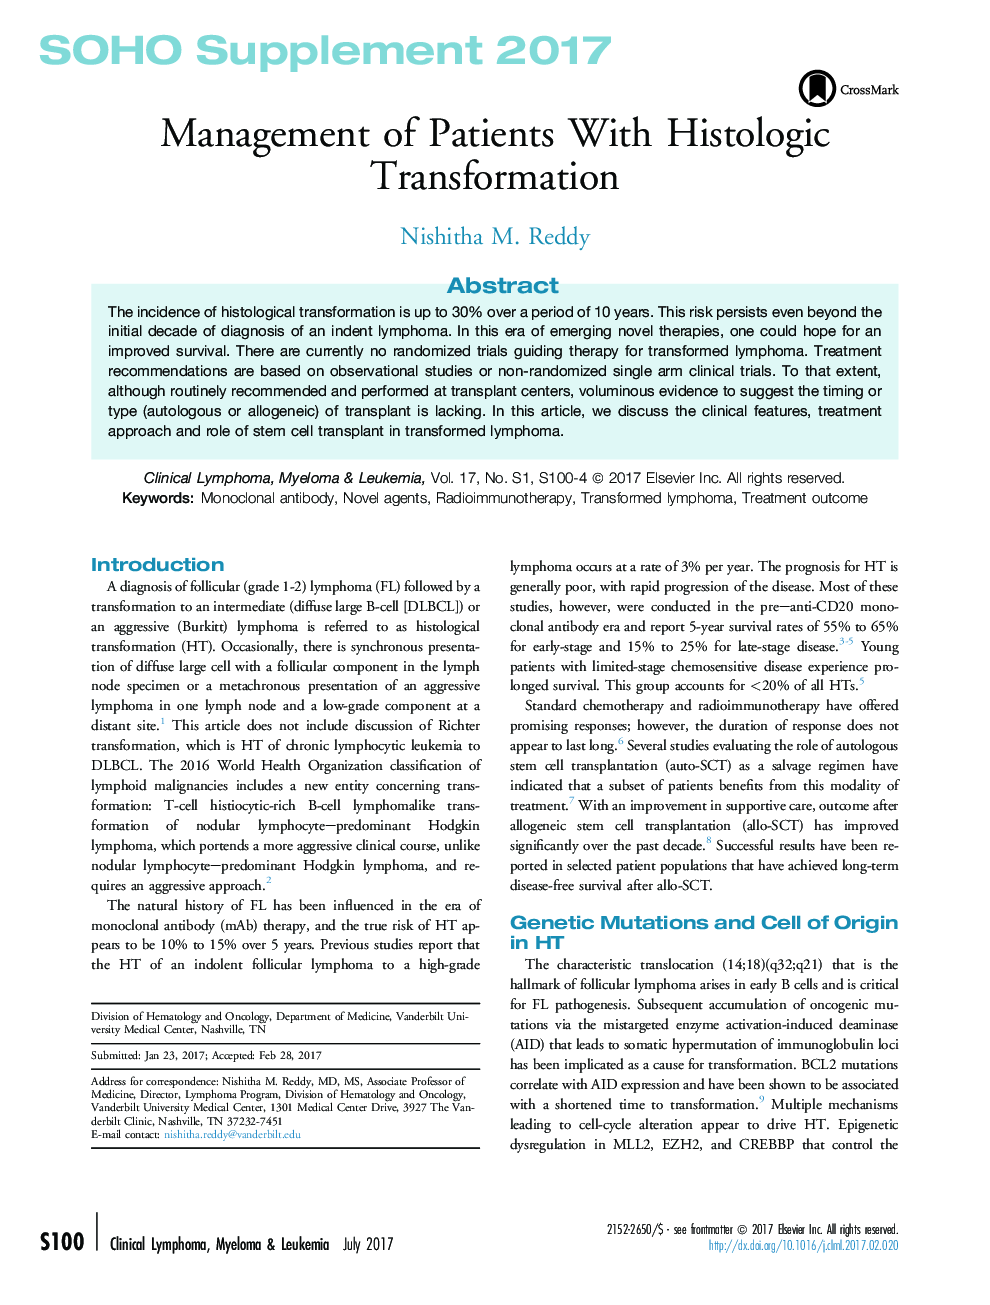 Management of Patients With Histologic Transformation